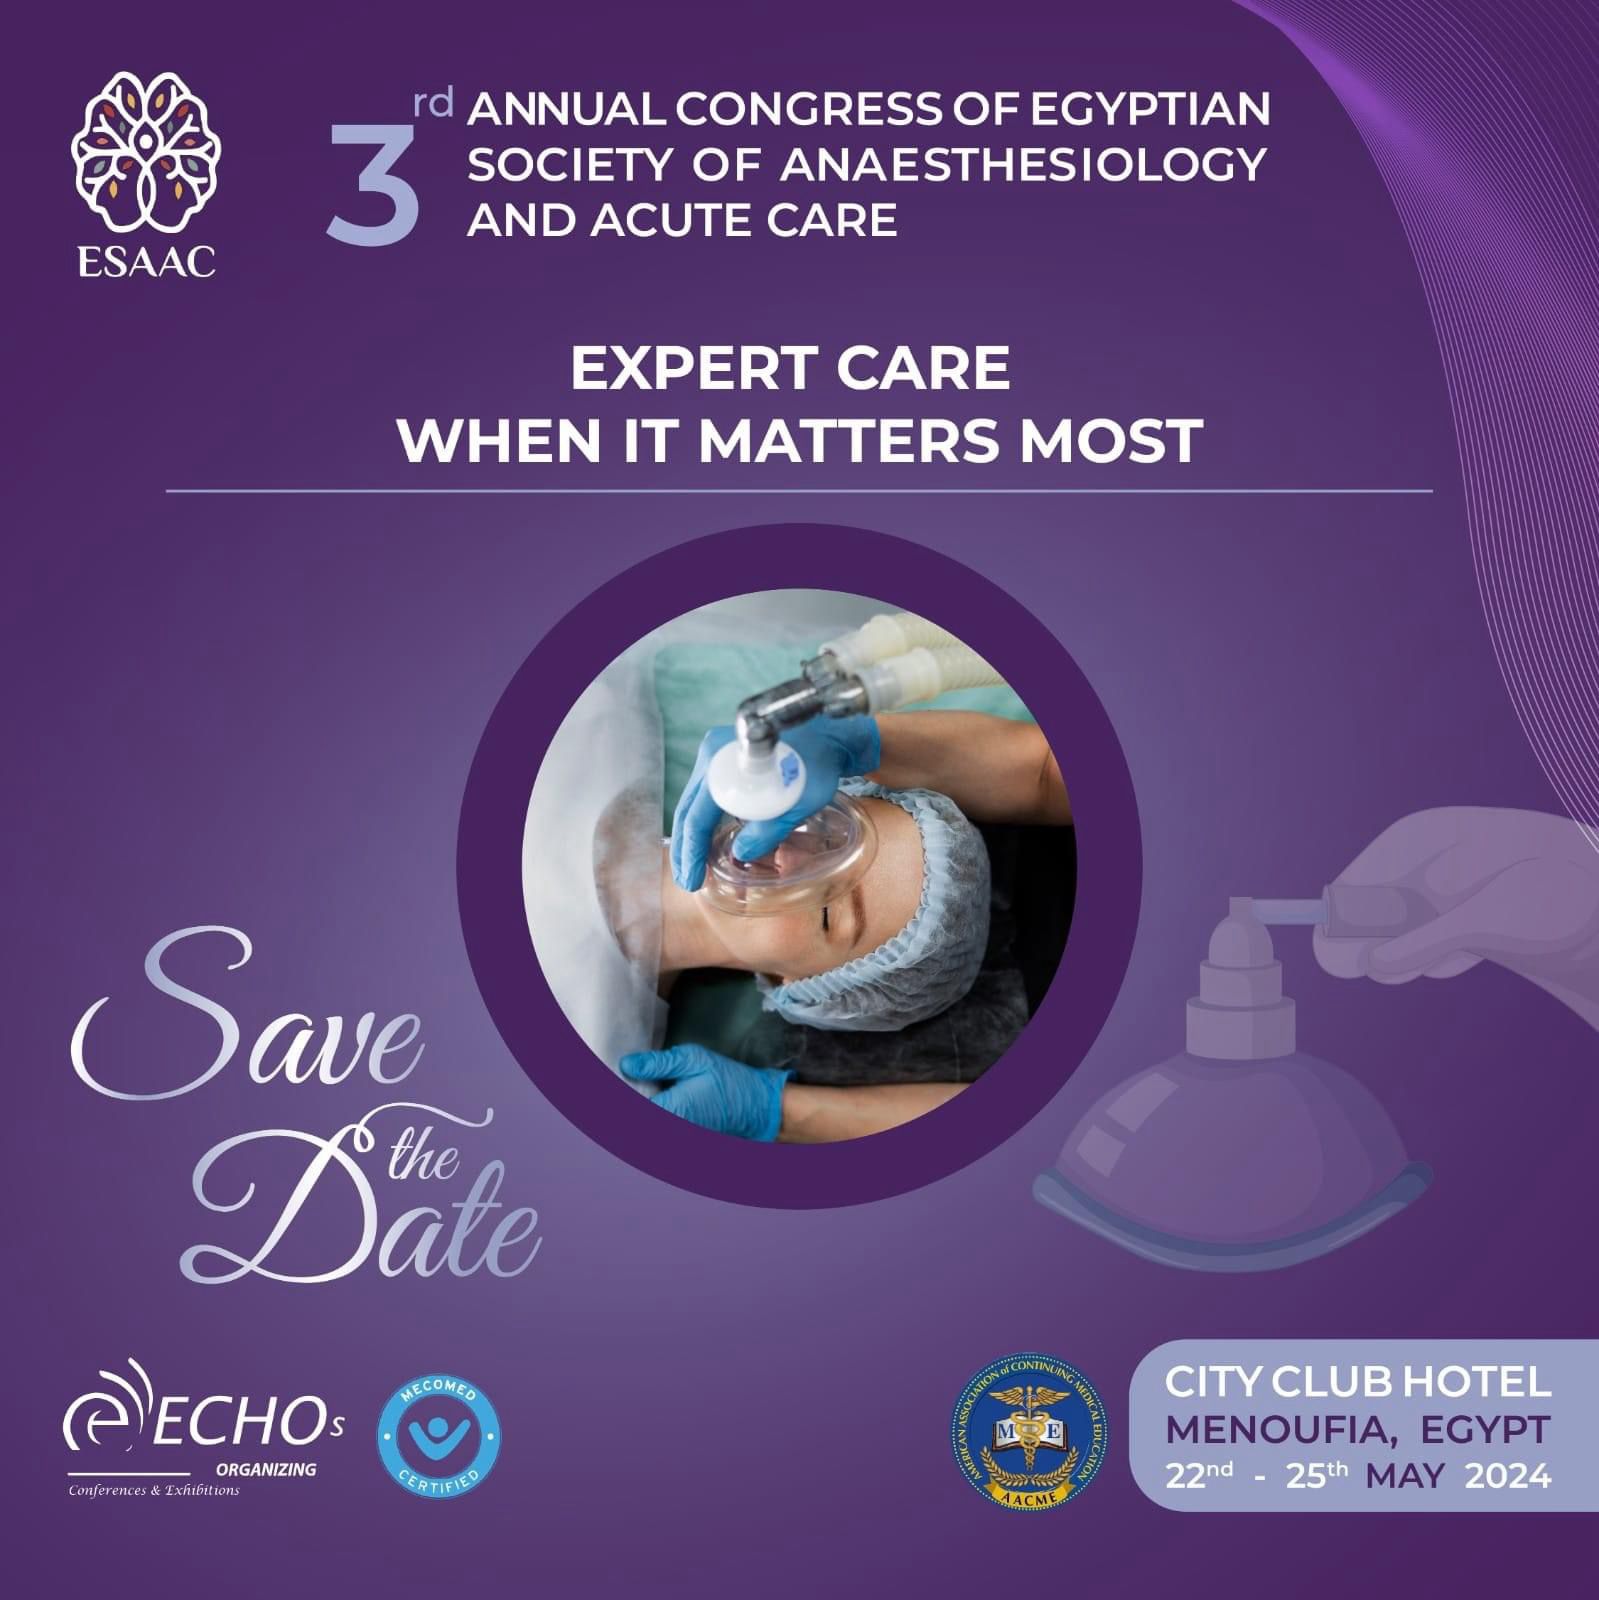 3rd ANNUAL CONGRESS OF EGYPTIAN SOCIETY OF ANAESTHESIOLOGY AND ACUTE CARE  2024